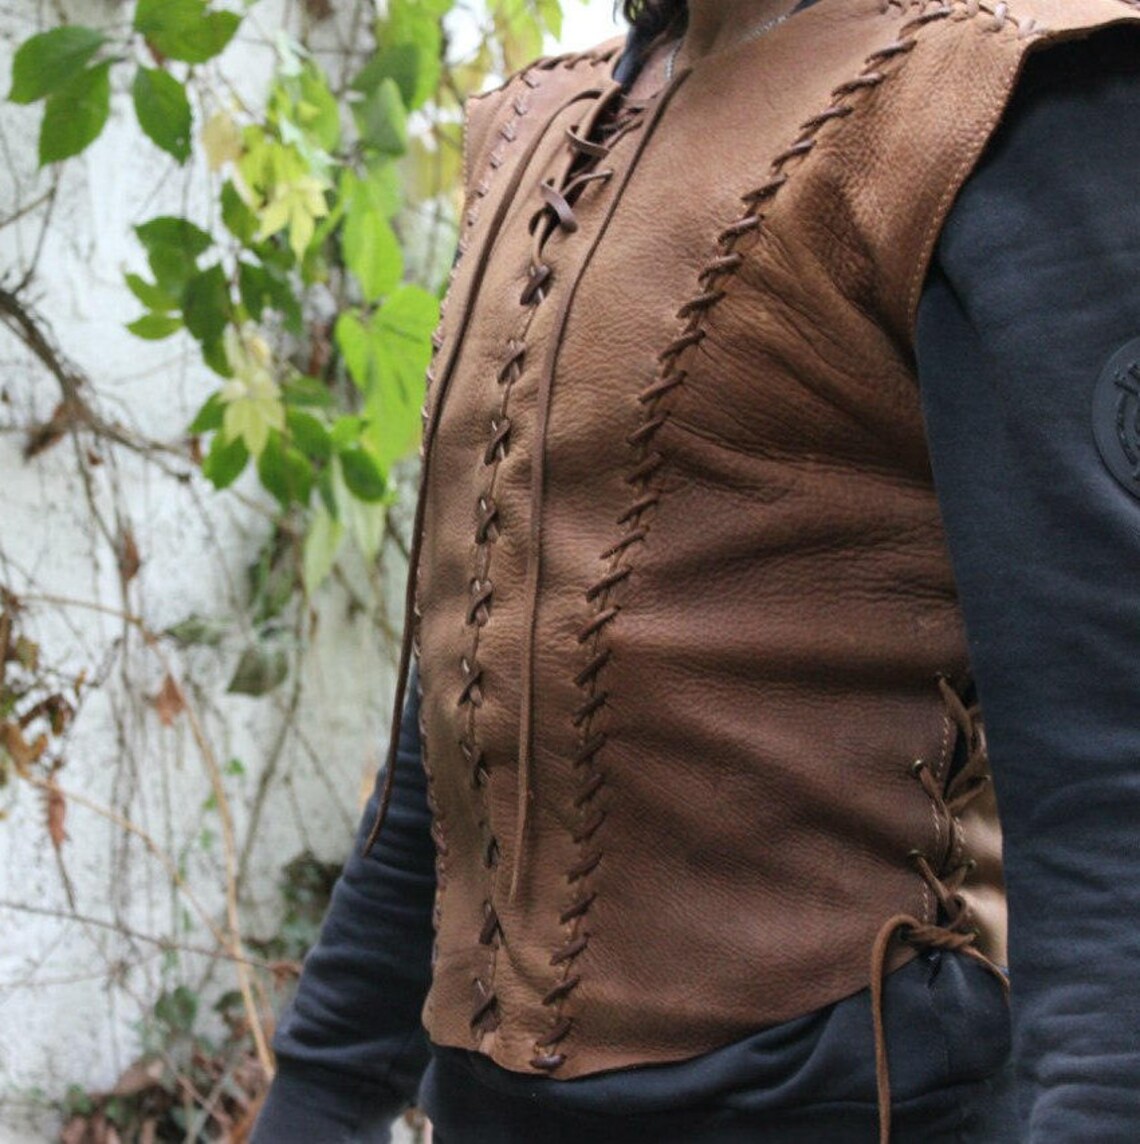 Medieval leather vest with Lace up front and sides medieval | Etsy